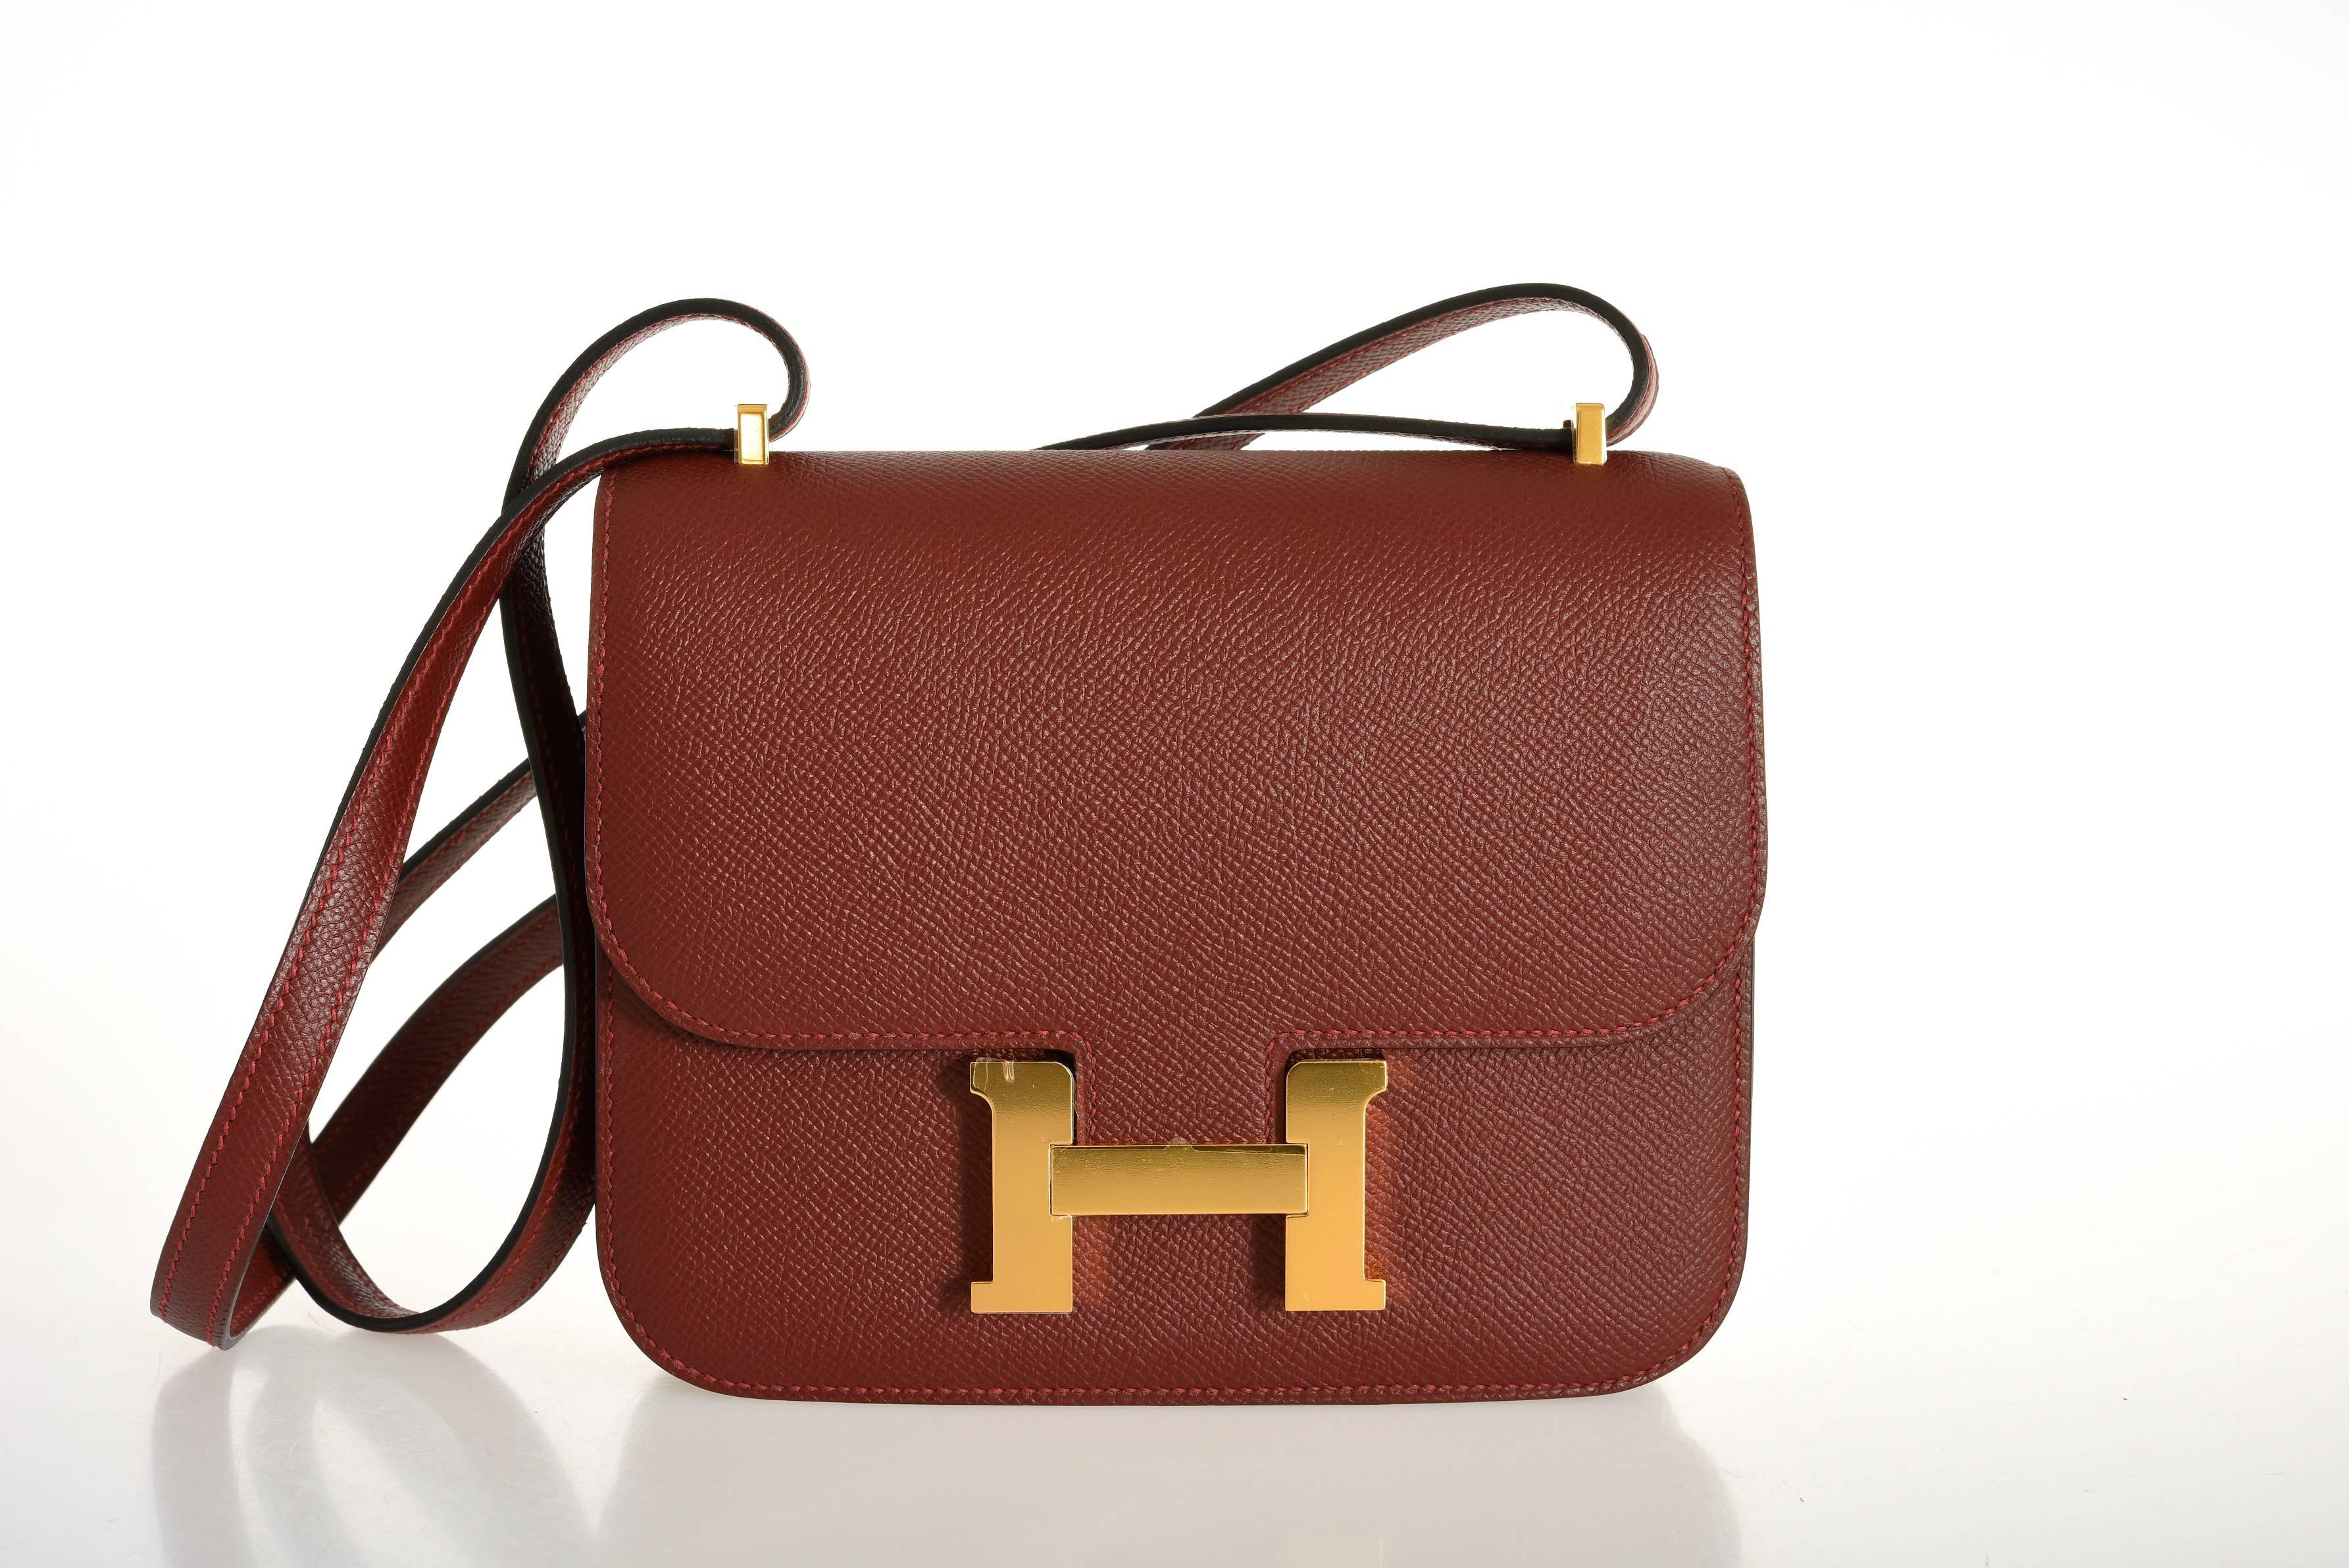 As always, another one of my fab finds! Hermes ROUGE H constance 18cm. Comfy longer strap that is perfect to carry cross body. Absolutely my fave bag! Leaves hands free to shop!

Beautiful  SWIFT leather with gorgeous GOLD hardware.

This bag is